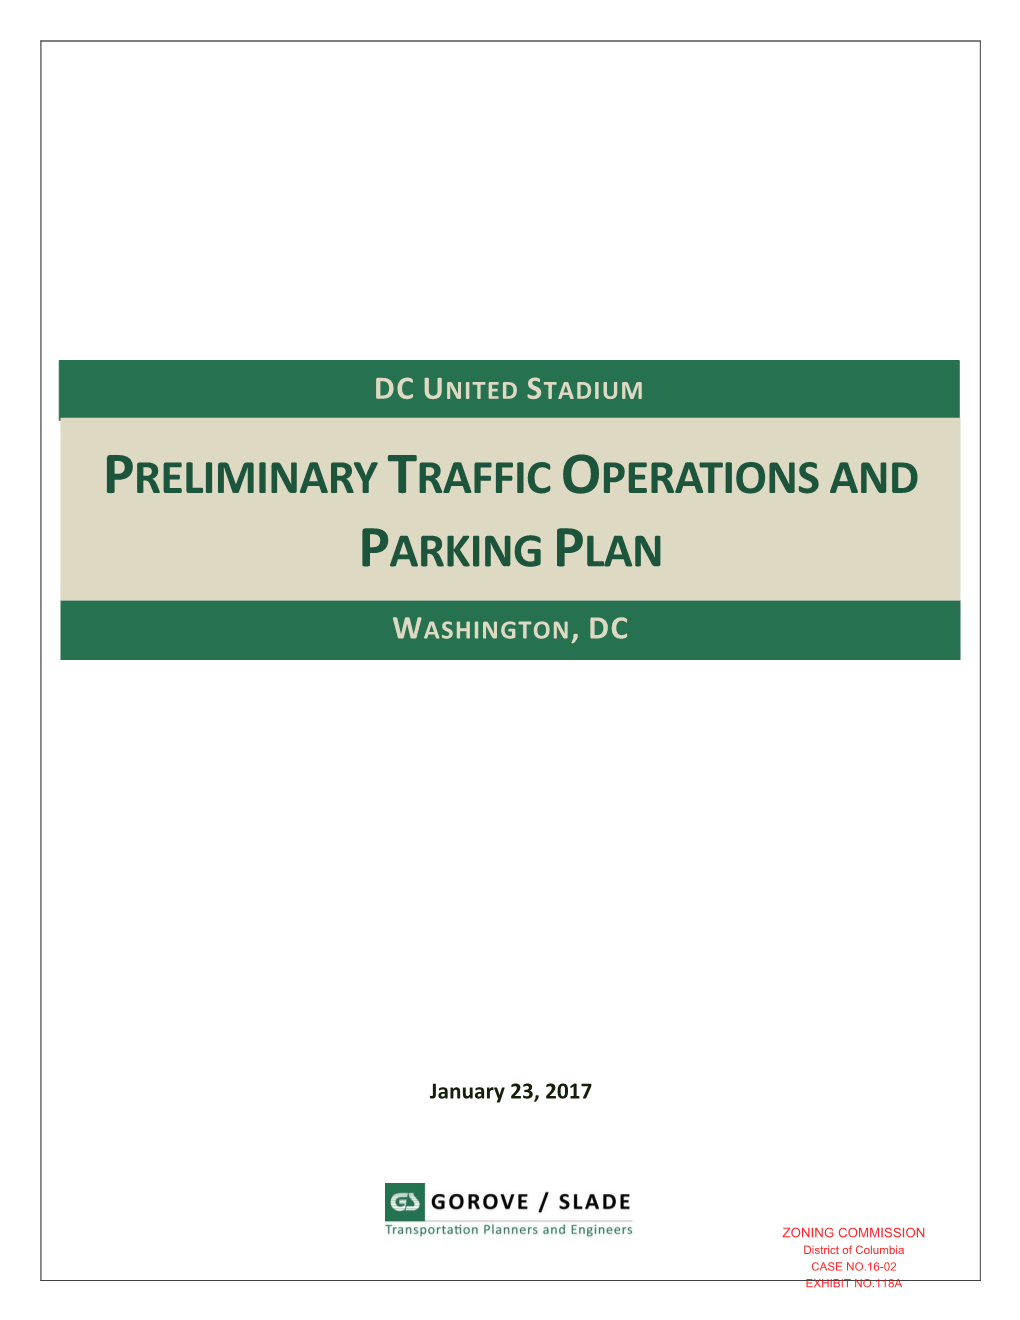 Preliminary Traffic Operations and Parking Plan